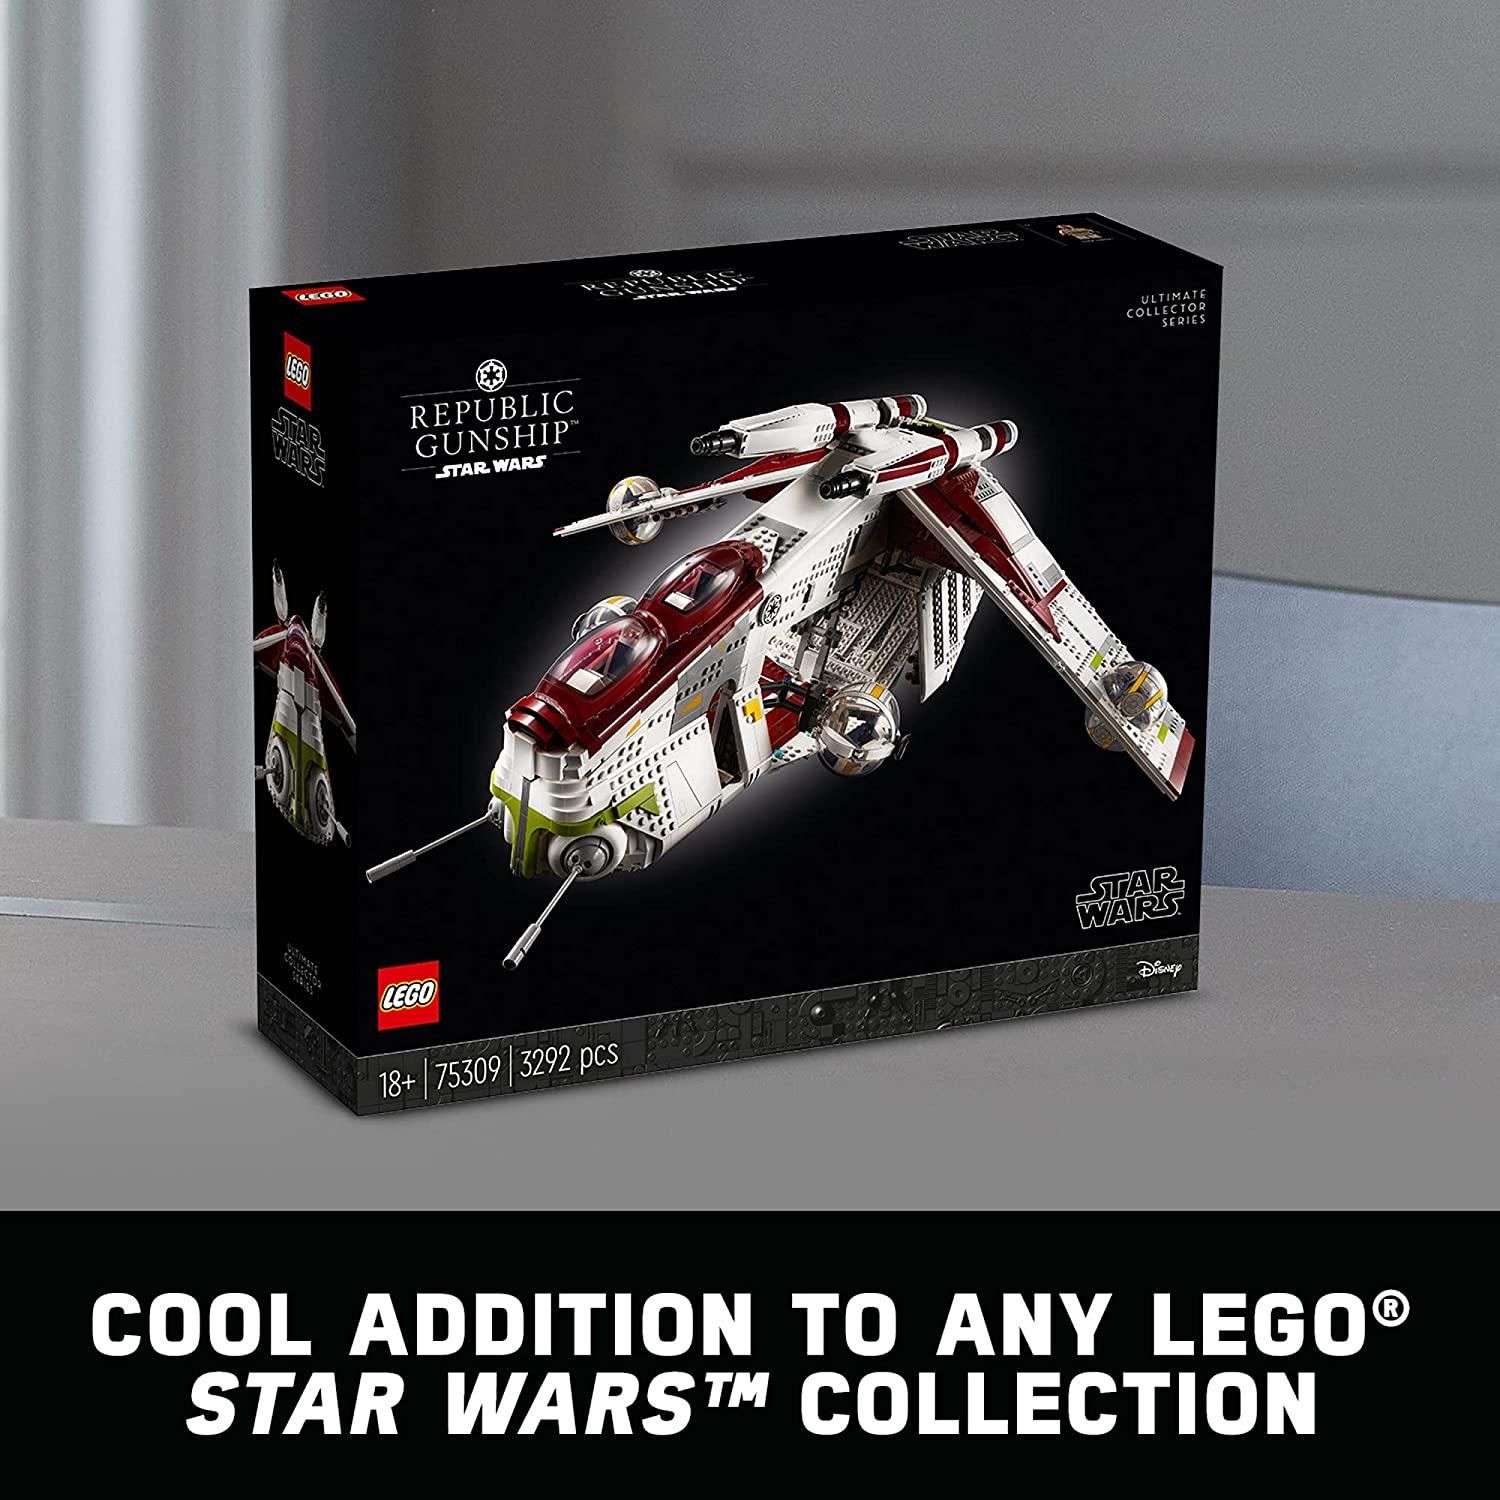 LEGO Star Wars Republic Gunship 75309 Building Kit; Cool, Ultimate Collector Series Build-and-Display Model (3,292 Pieces) - BumbleToys - 18+, Boys, LEGO, OXE, Pre-Order, star wars